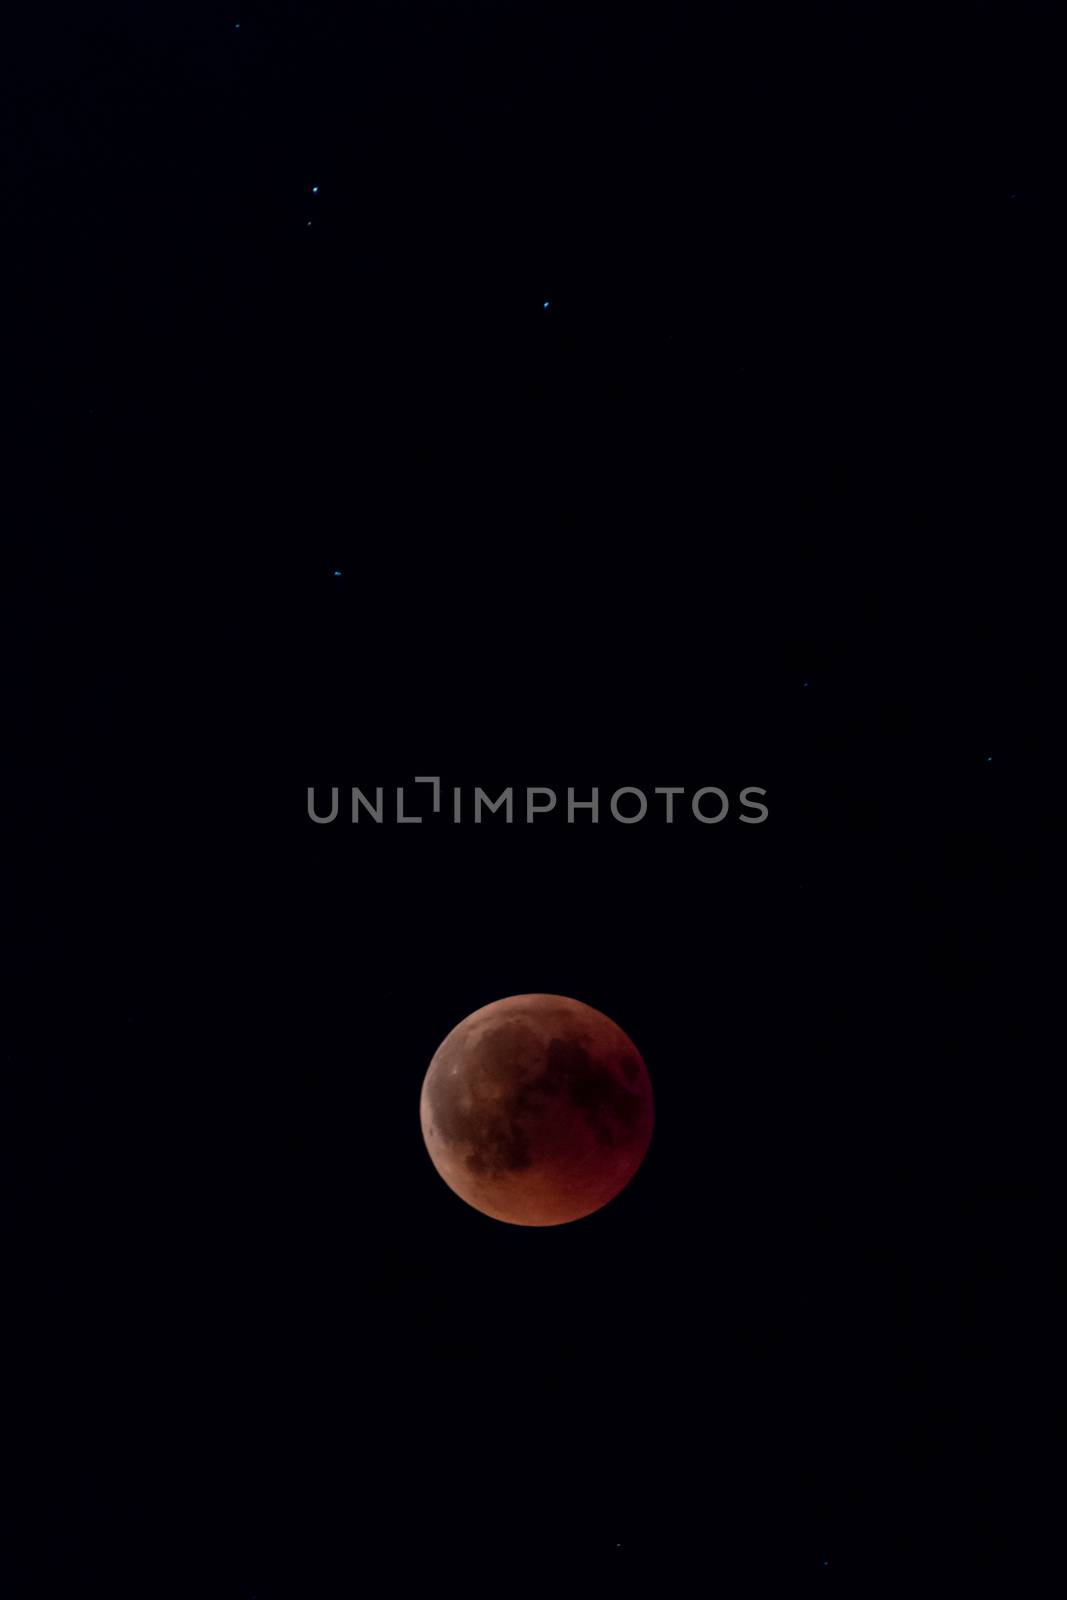 Blood moon at most red moment in black night